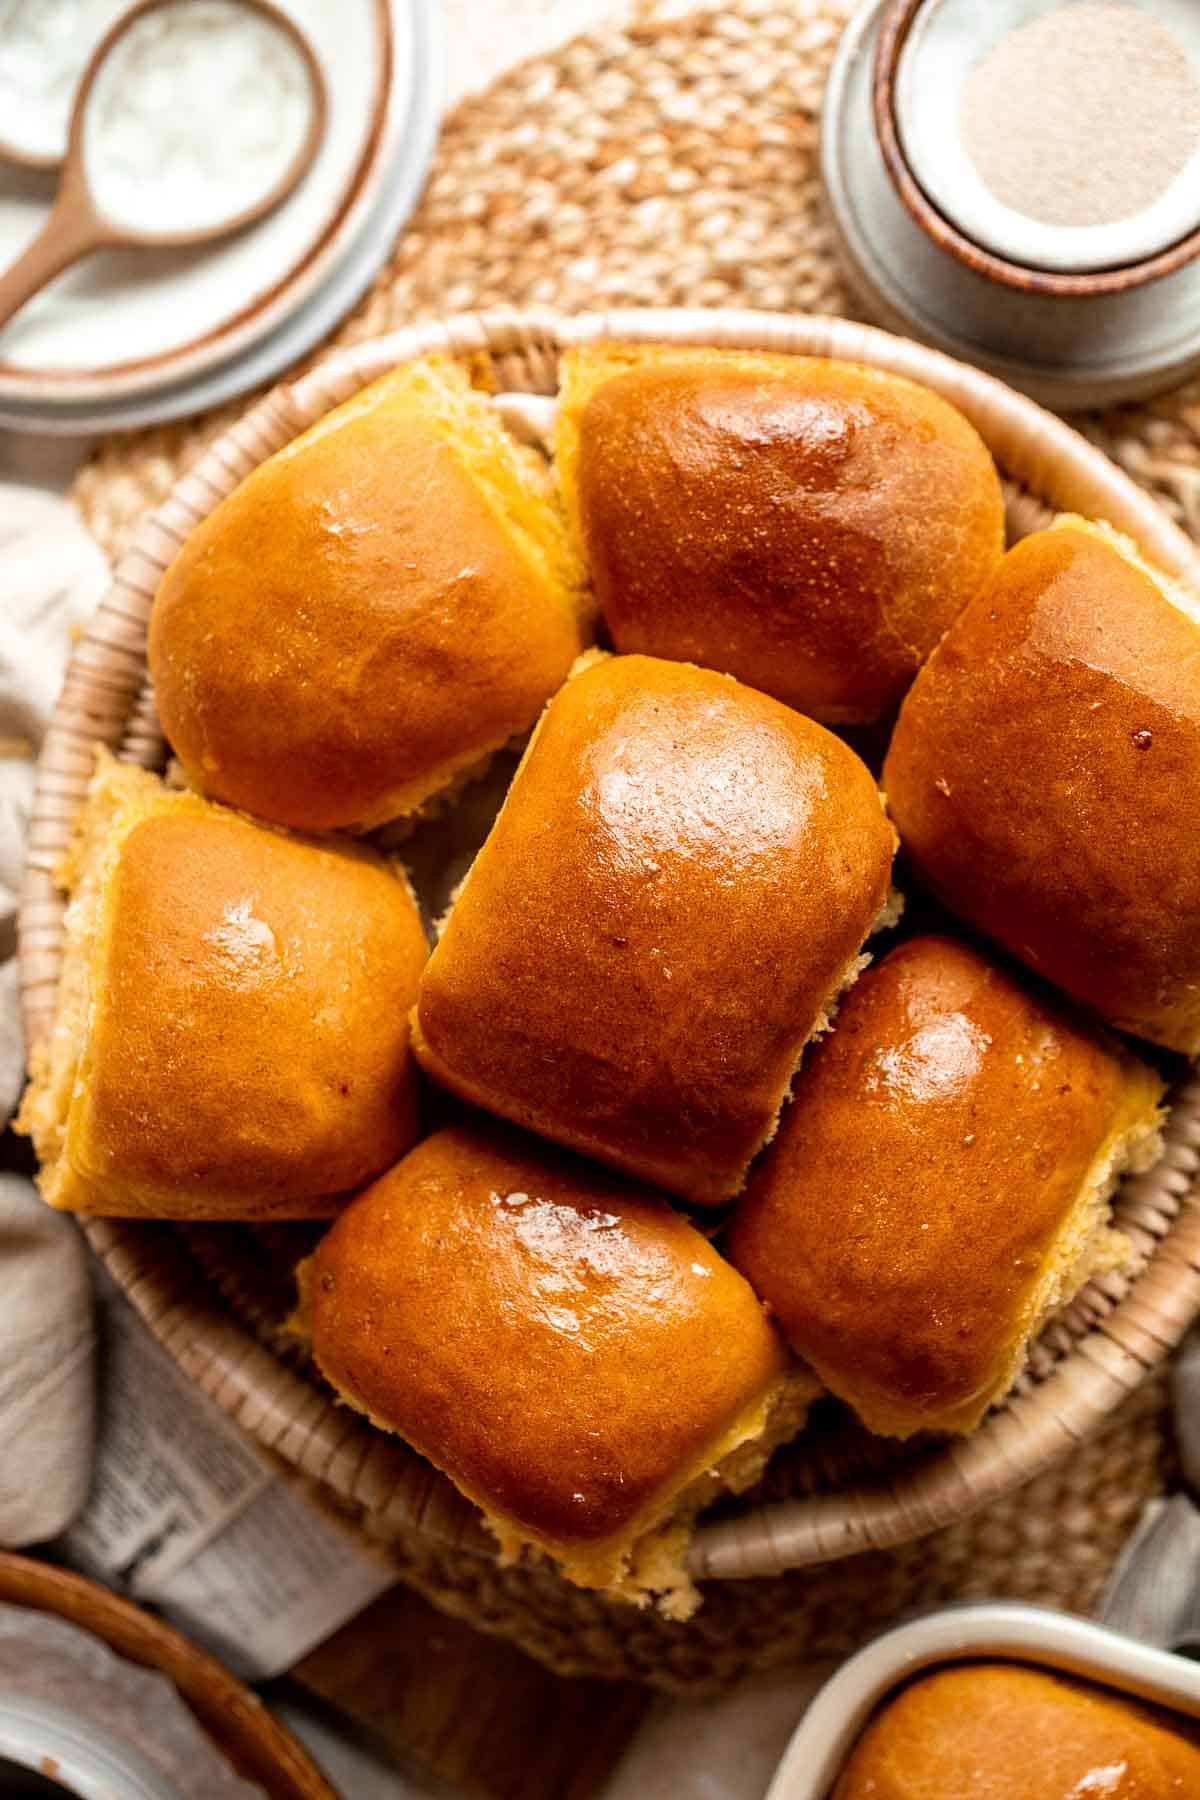 Fluffy Sweet Potato Rolls are made with perfectly cooked sweet potato, which adds a tenderness and sweet flavor that takes them over the top! | aheadofthyme.com